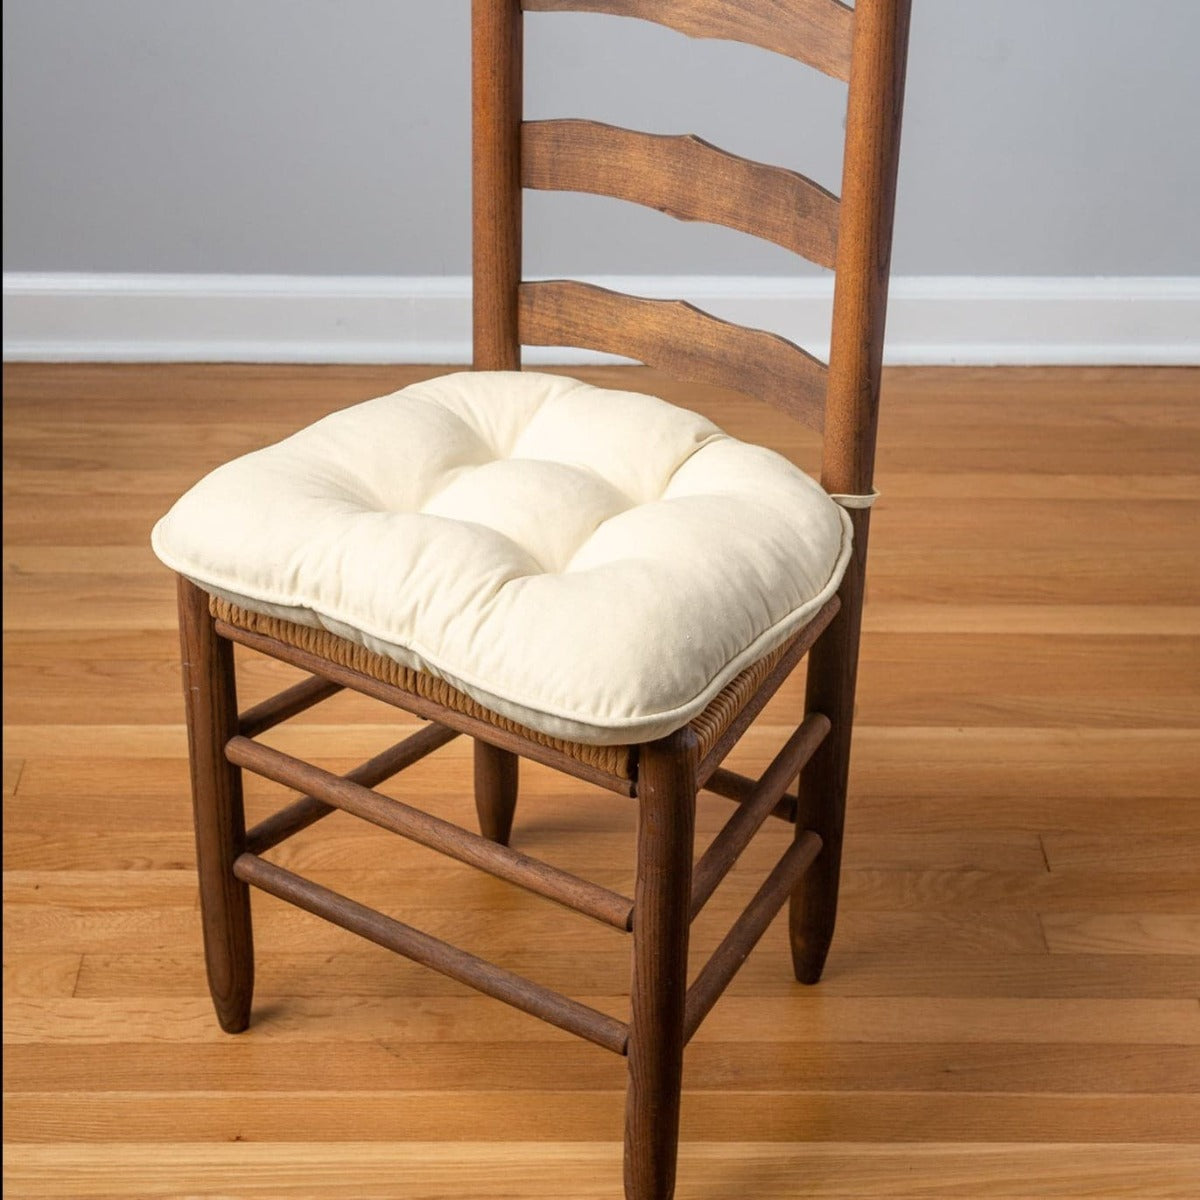 natural cotton chair pads on ladder back chair with cane seat in extra-thick cushion with ties